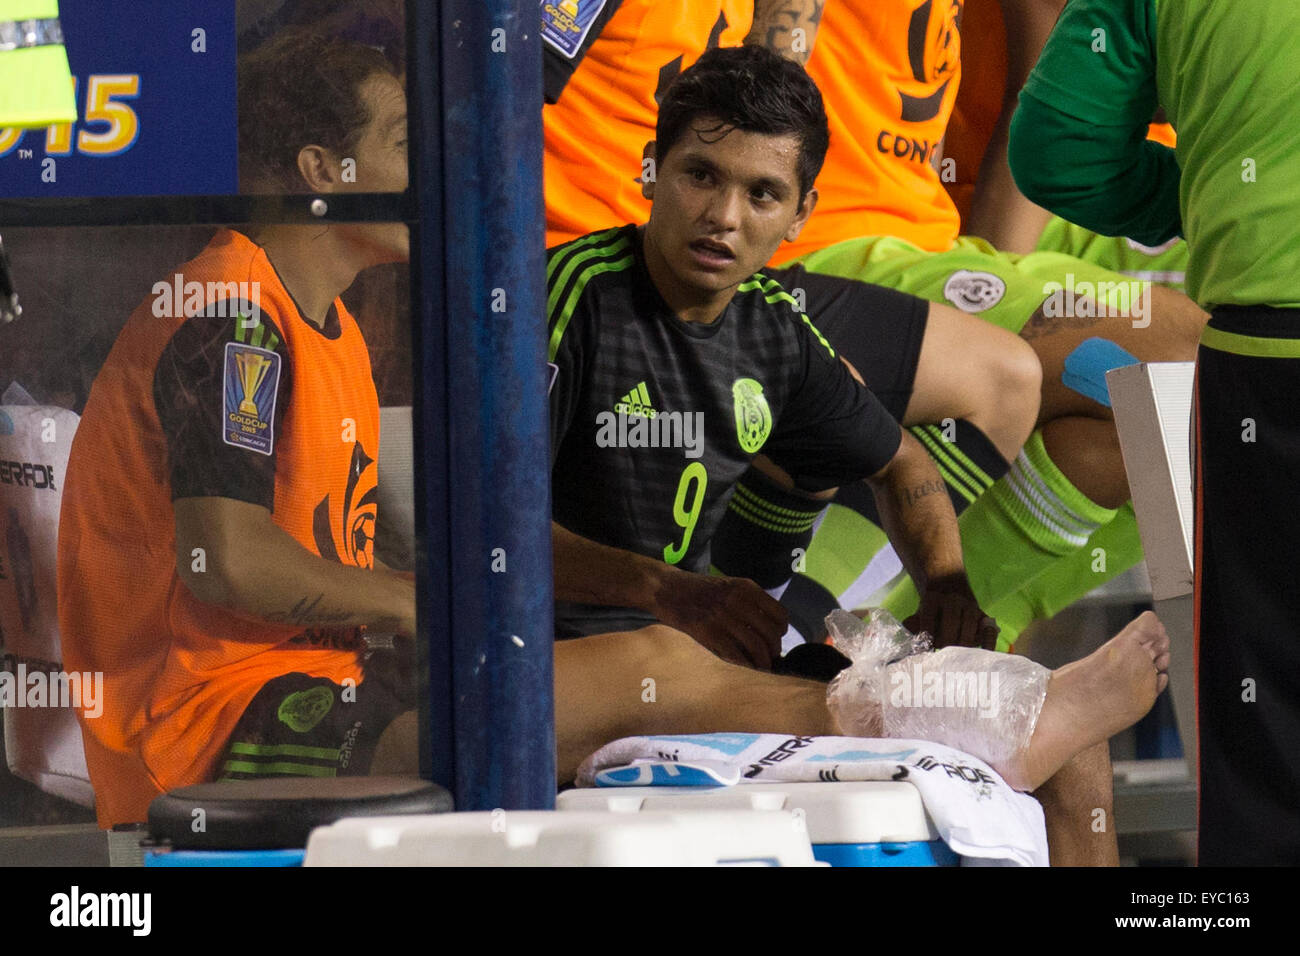 Philadelphia, Pennsylvania, USA. 26th July, 2015. Mexico forward Jesus Corona (9) talks with midfielder Andres Guardado (18), who has his left leg iced up, on the sidelines during the CONCACAF Gold Cup 2015 Final match between Jamaica and Mexico at Lincoln Financial Field in Philadelphia, Pennsylvania. Mexico won 3-1. Christopher Szagola/CSM Stock Photo